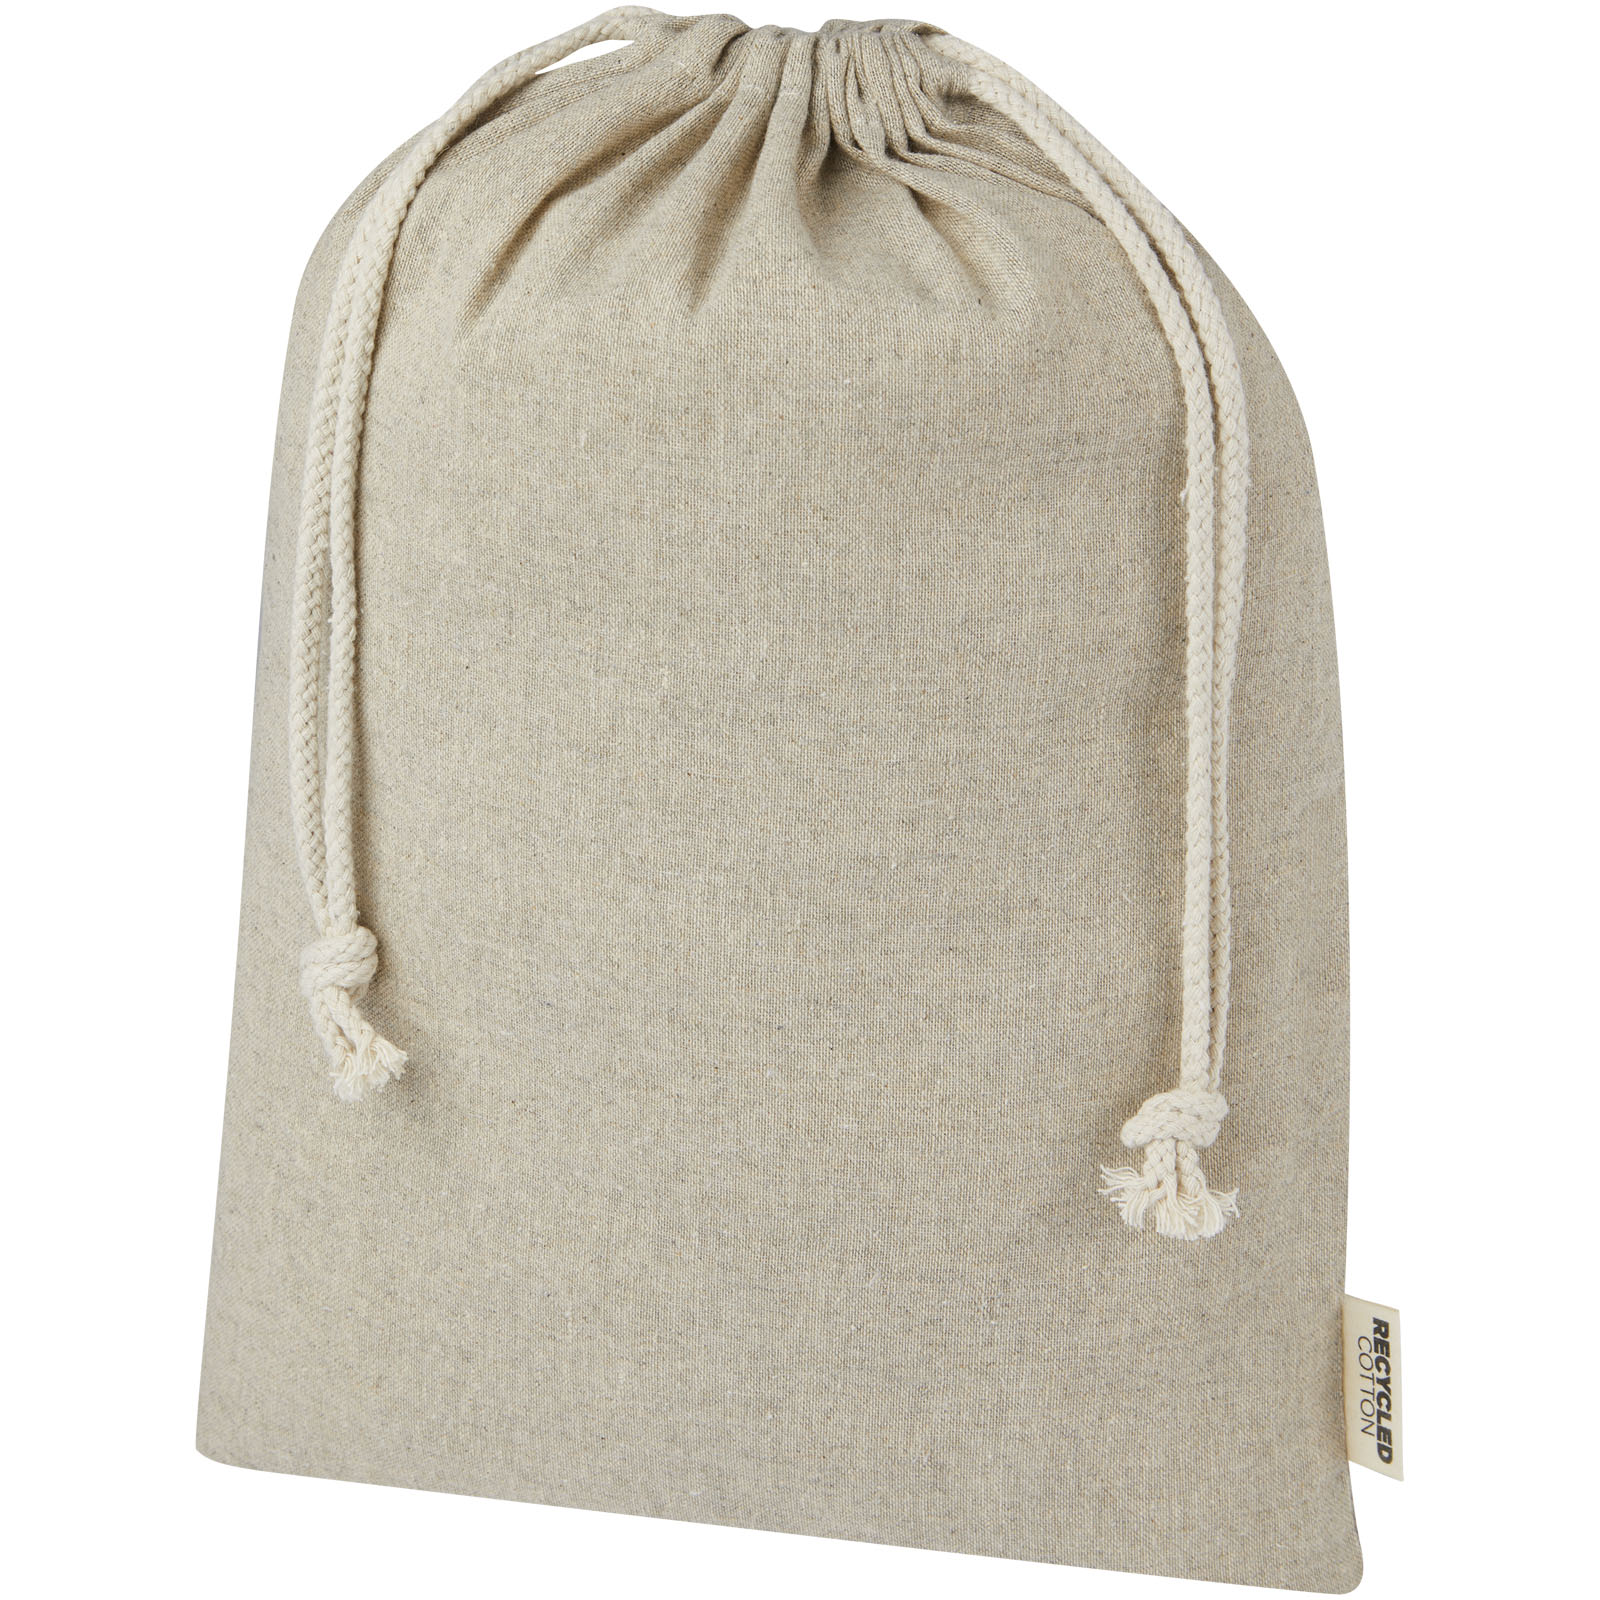 Advertising Cotton Bags - Pheebs 150 g/m² GRS recycled cotton gift bag large 4L - 0